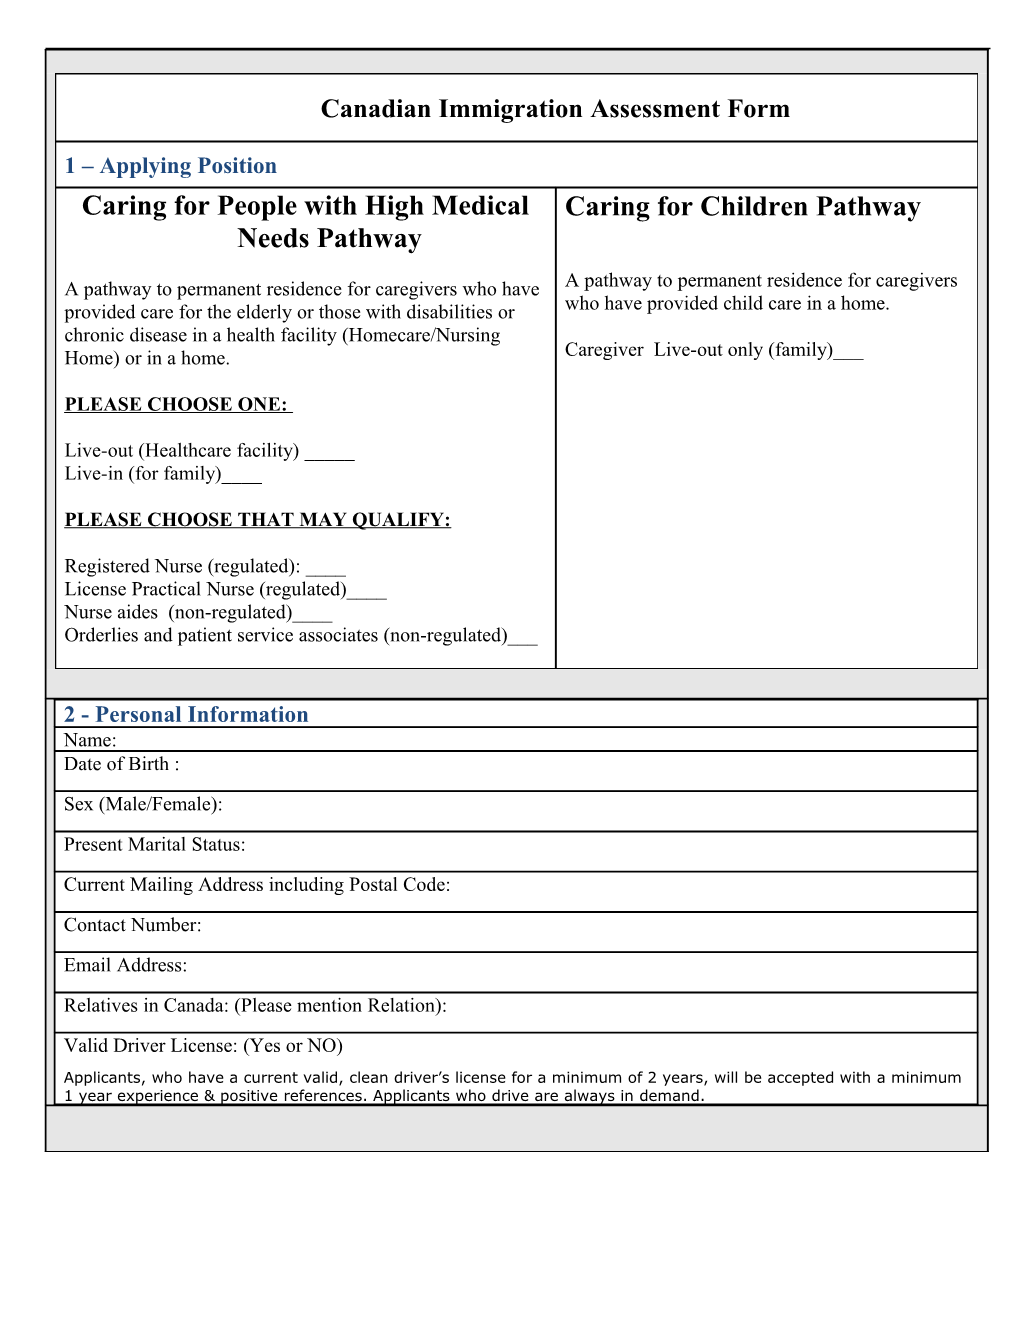 Caring for People with High Medical Needs Pathway